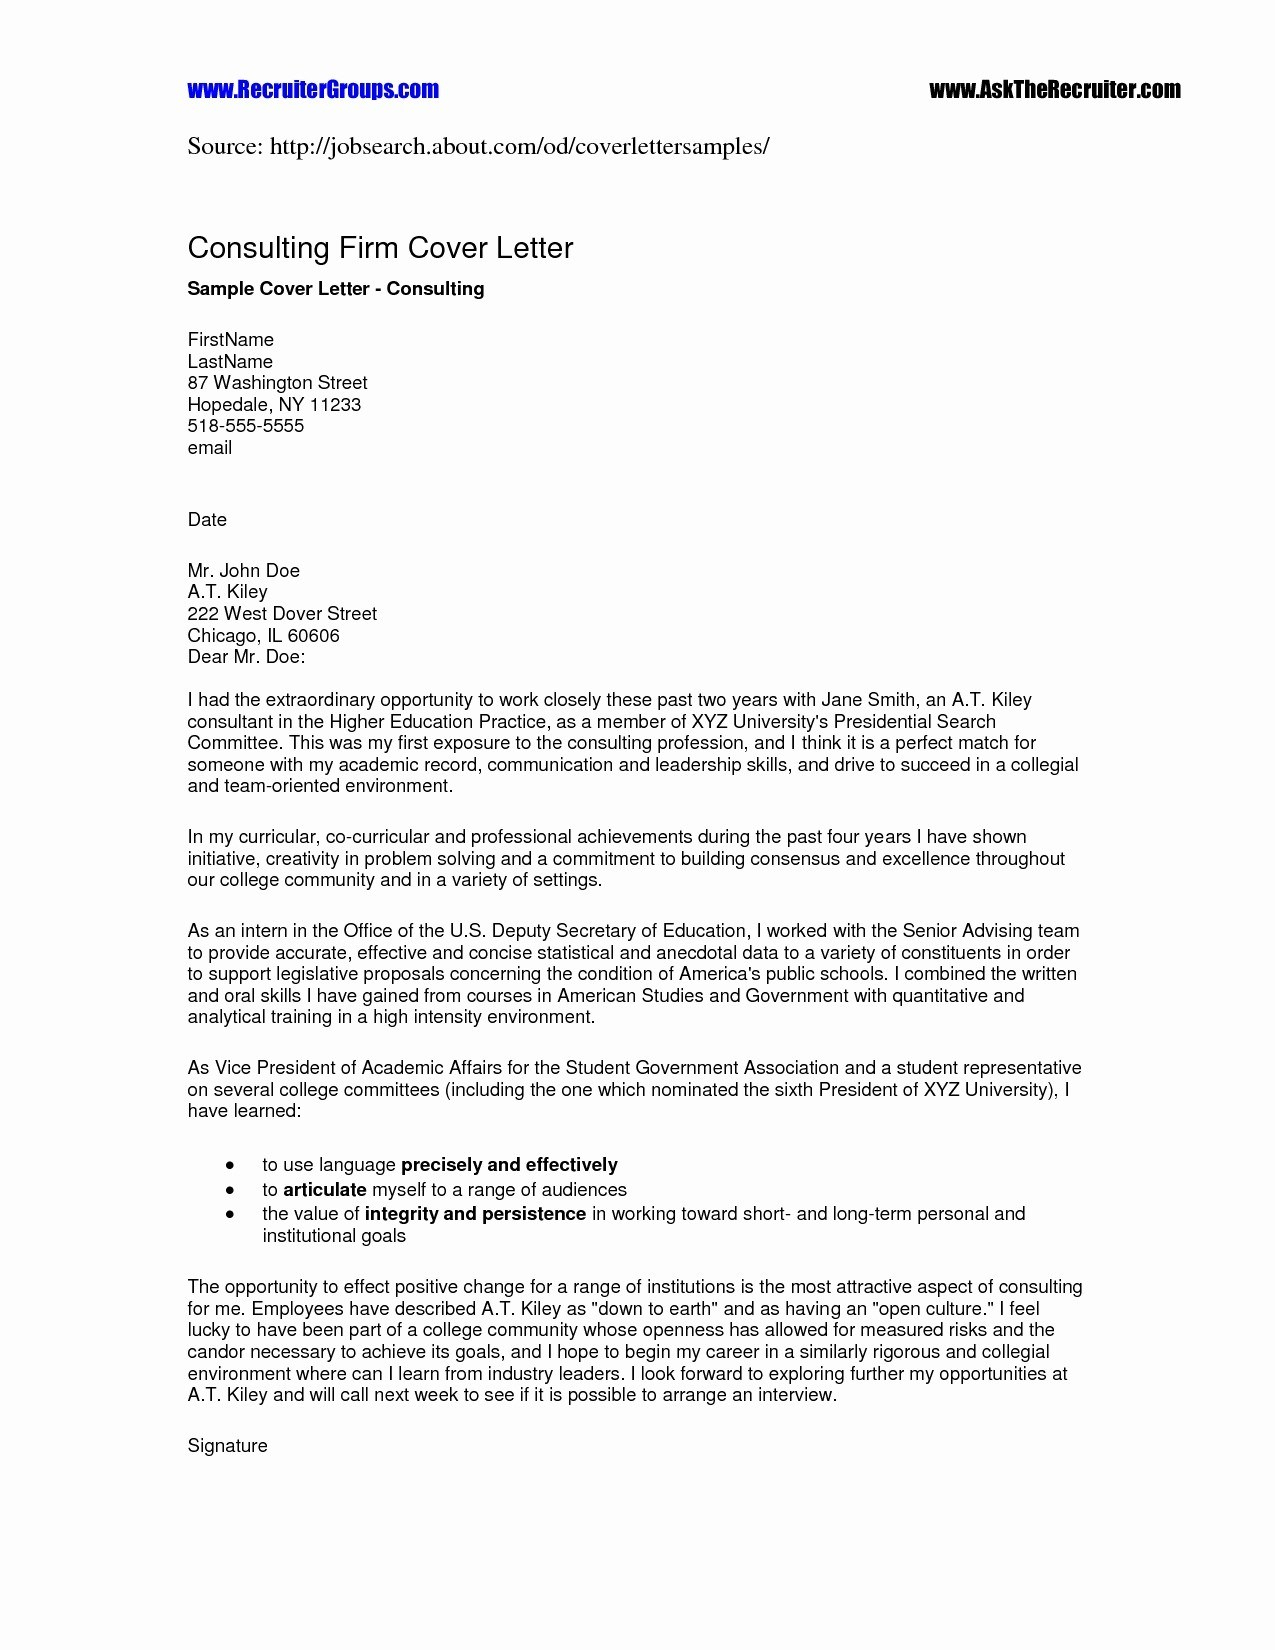 Teacher Cover Letter Template - Resume and Cover Letter Templates Fresh Teacher Cover Letter